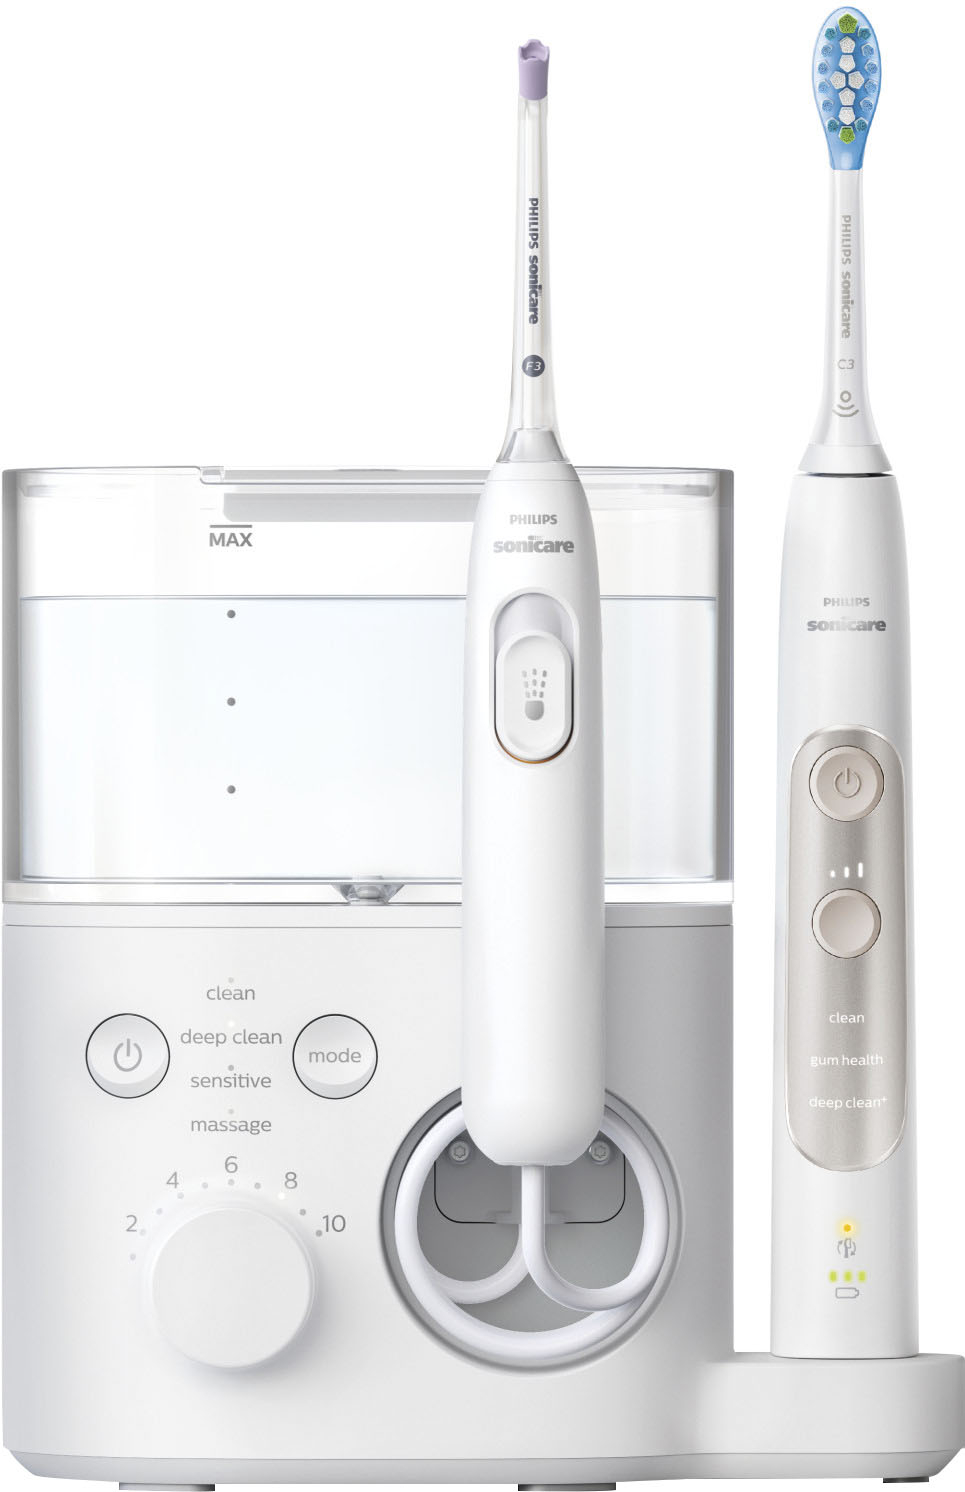 Angle View: Philips Sonicare Power Flosser & Toothbrush System 7000, HX3921 - White